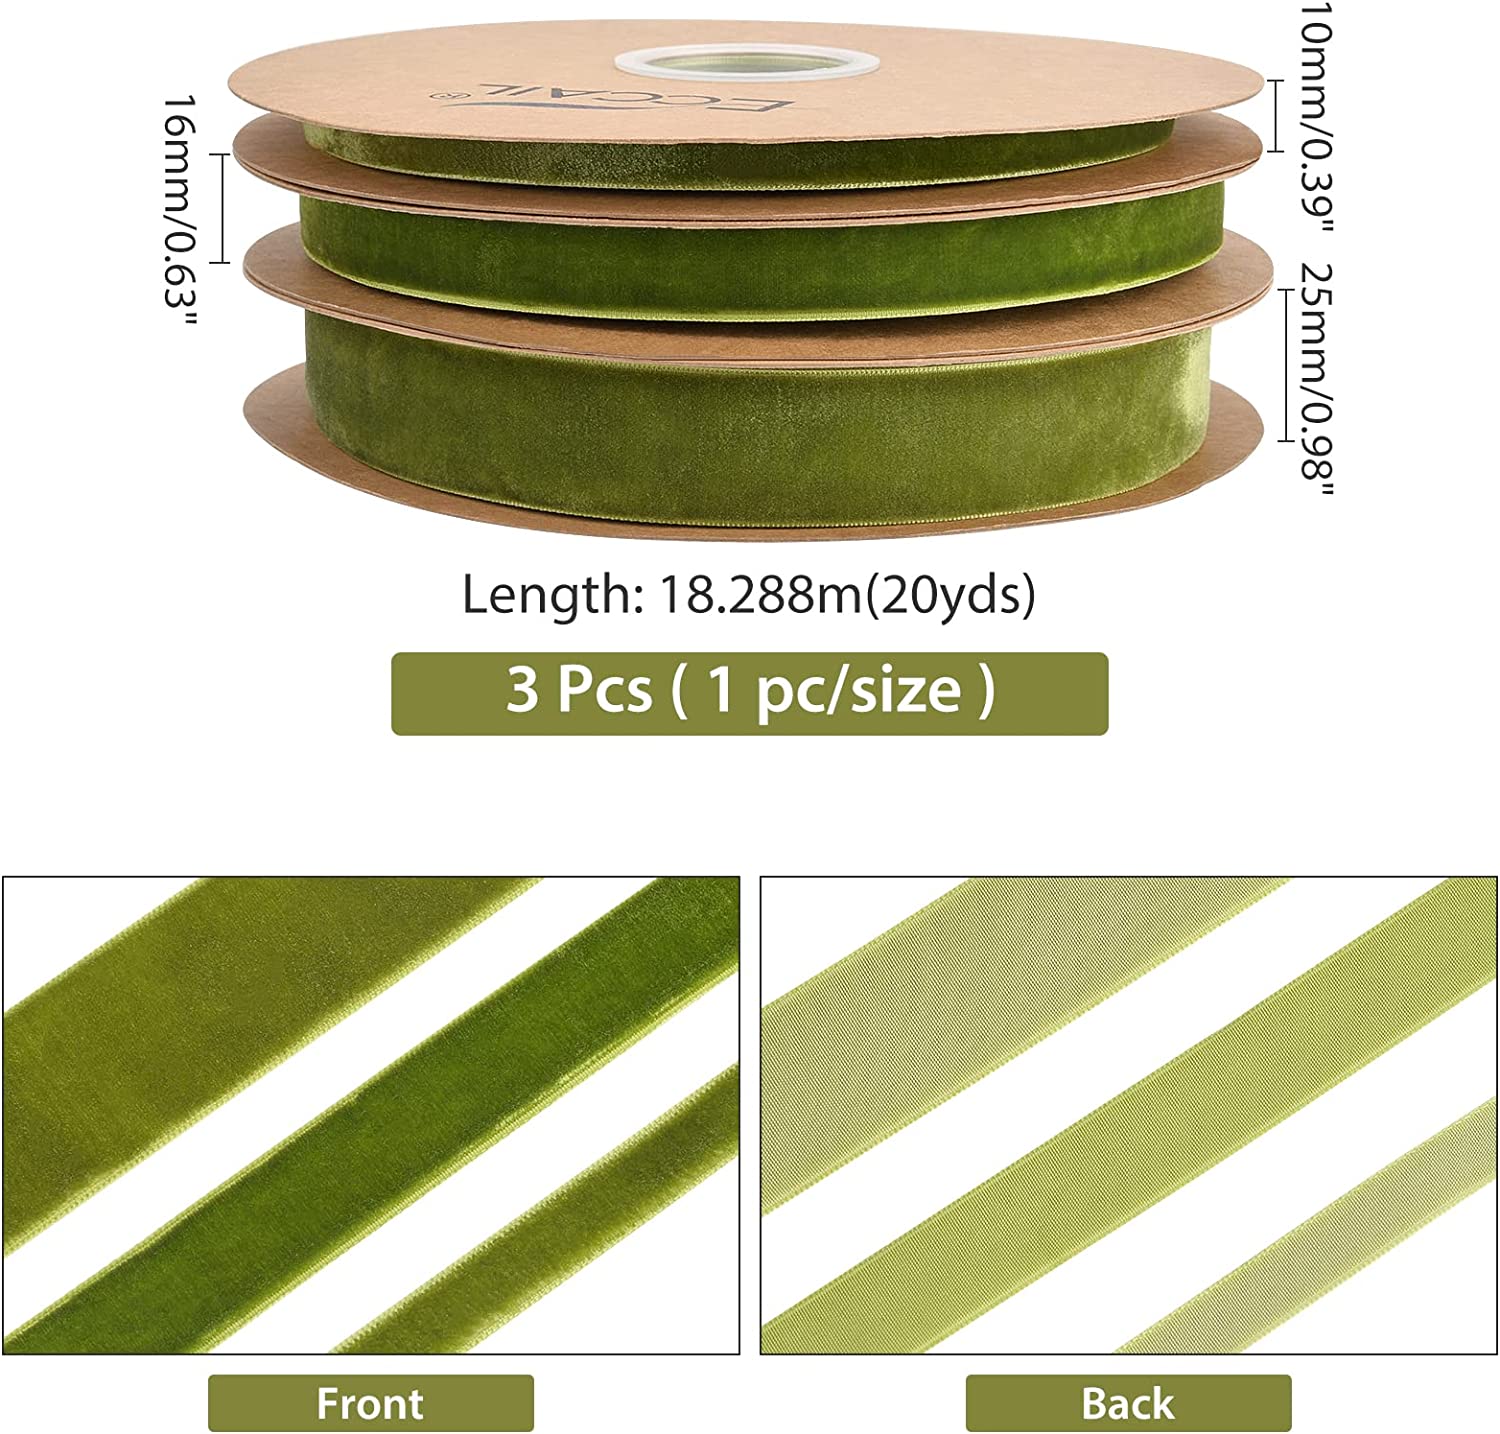 60 Yards 3 Styles Single Side Velvet Ribbon, Polyester Satin Ribbon Roll Trim Spool Single Face Ribbon for Wedding Gift Wrapping Hair Bows Flower Arranging Home Decorating (Green Series)